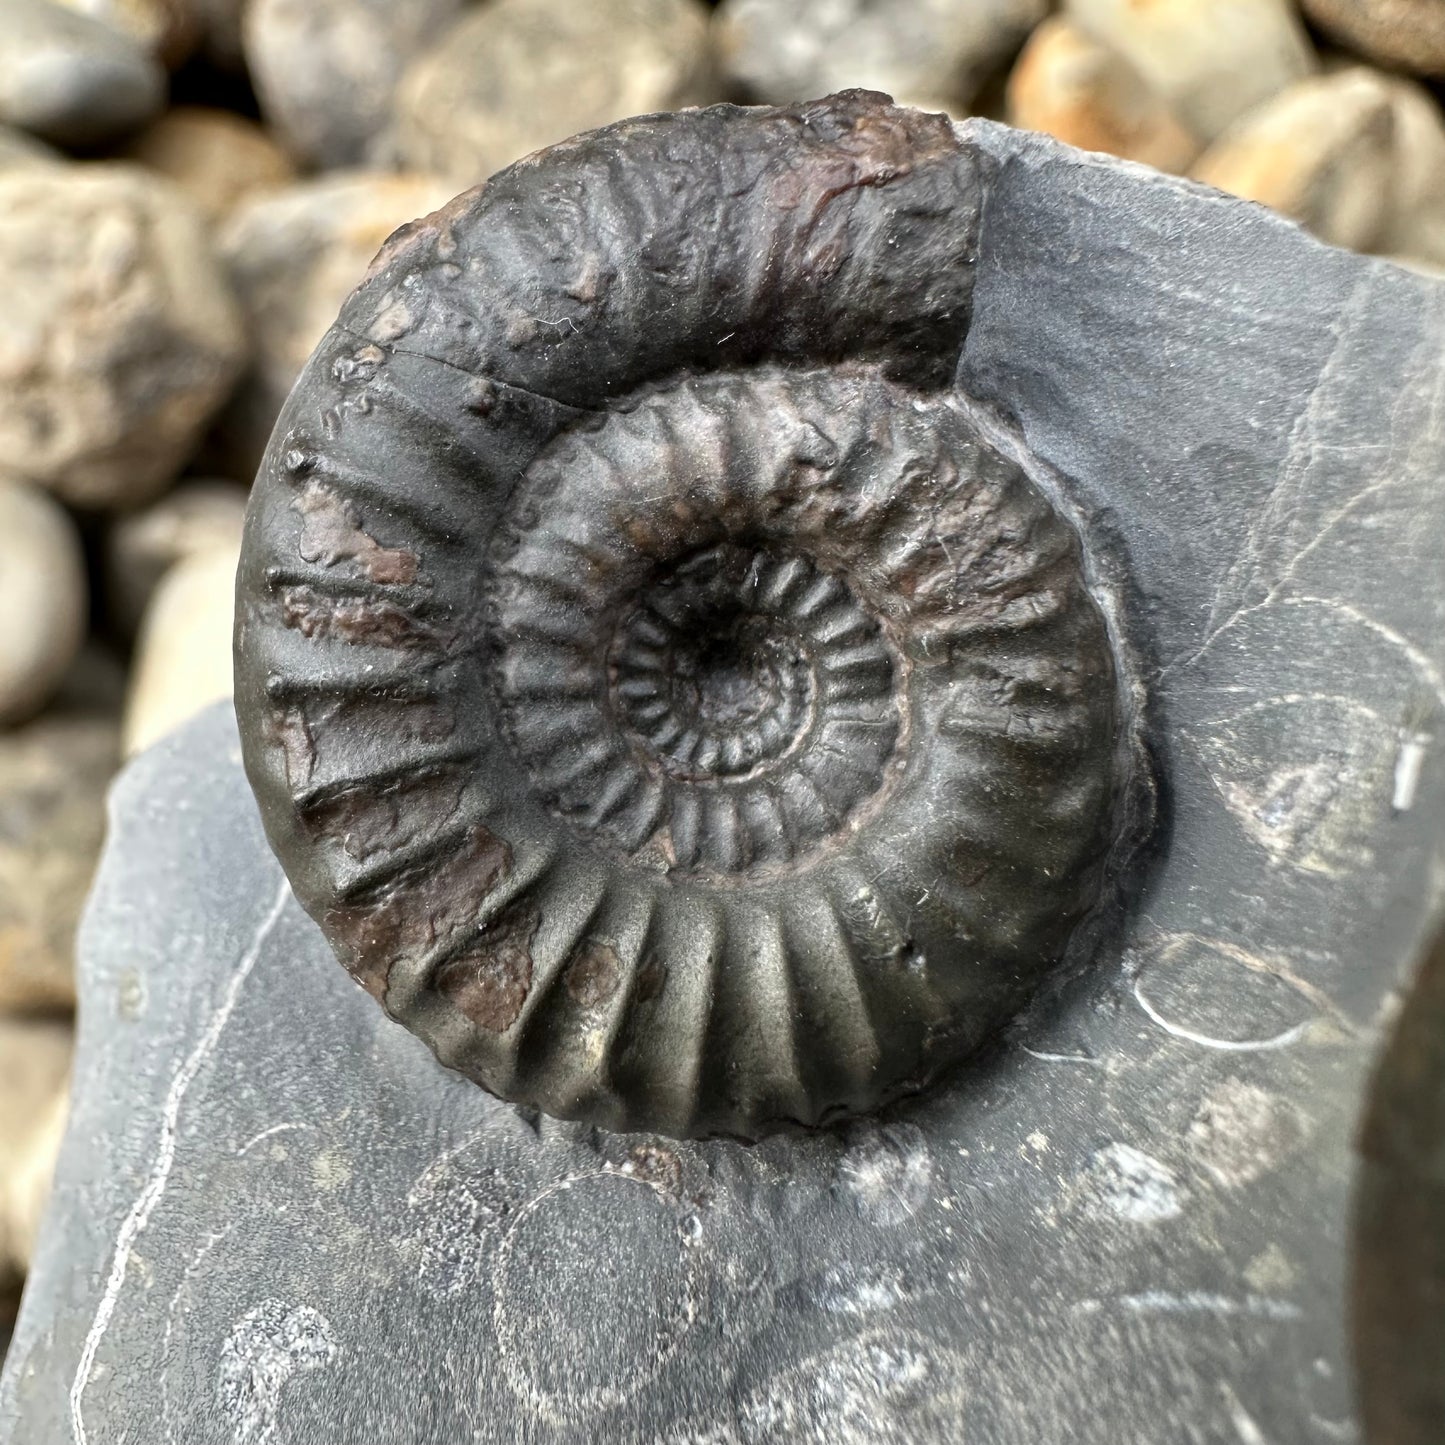 Catacoeloceras / pseudolioceras boulbiense ammonite fossil - Whitby, North Yorkshire Jurassic Coast, Yorkshire Fossils